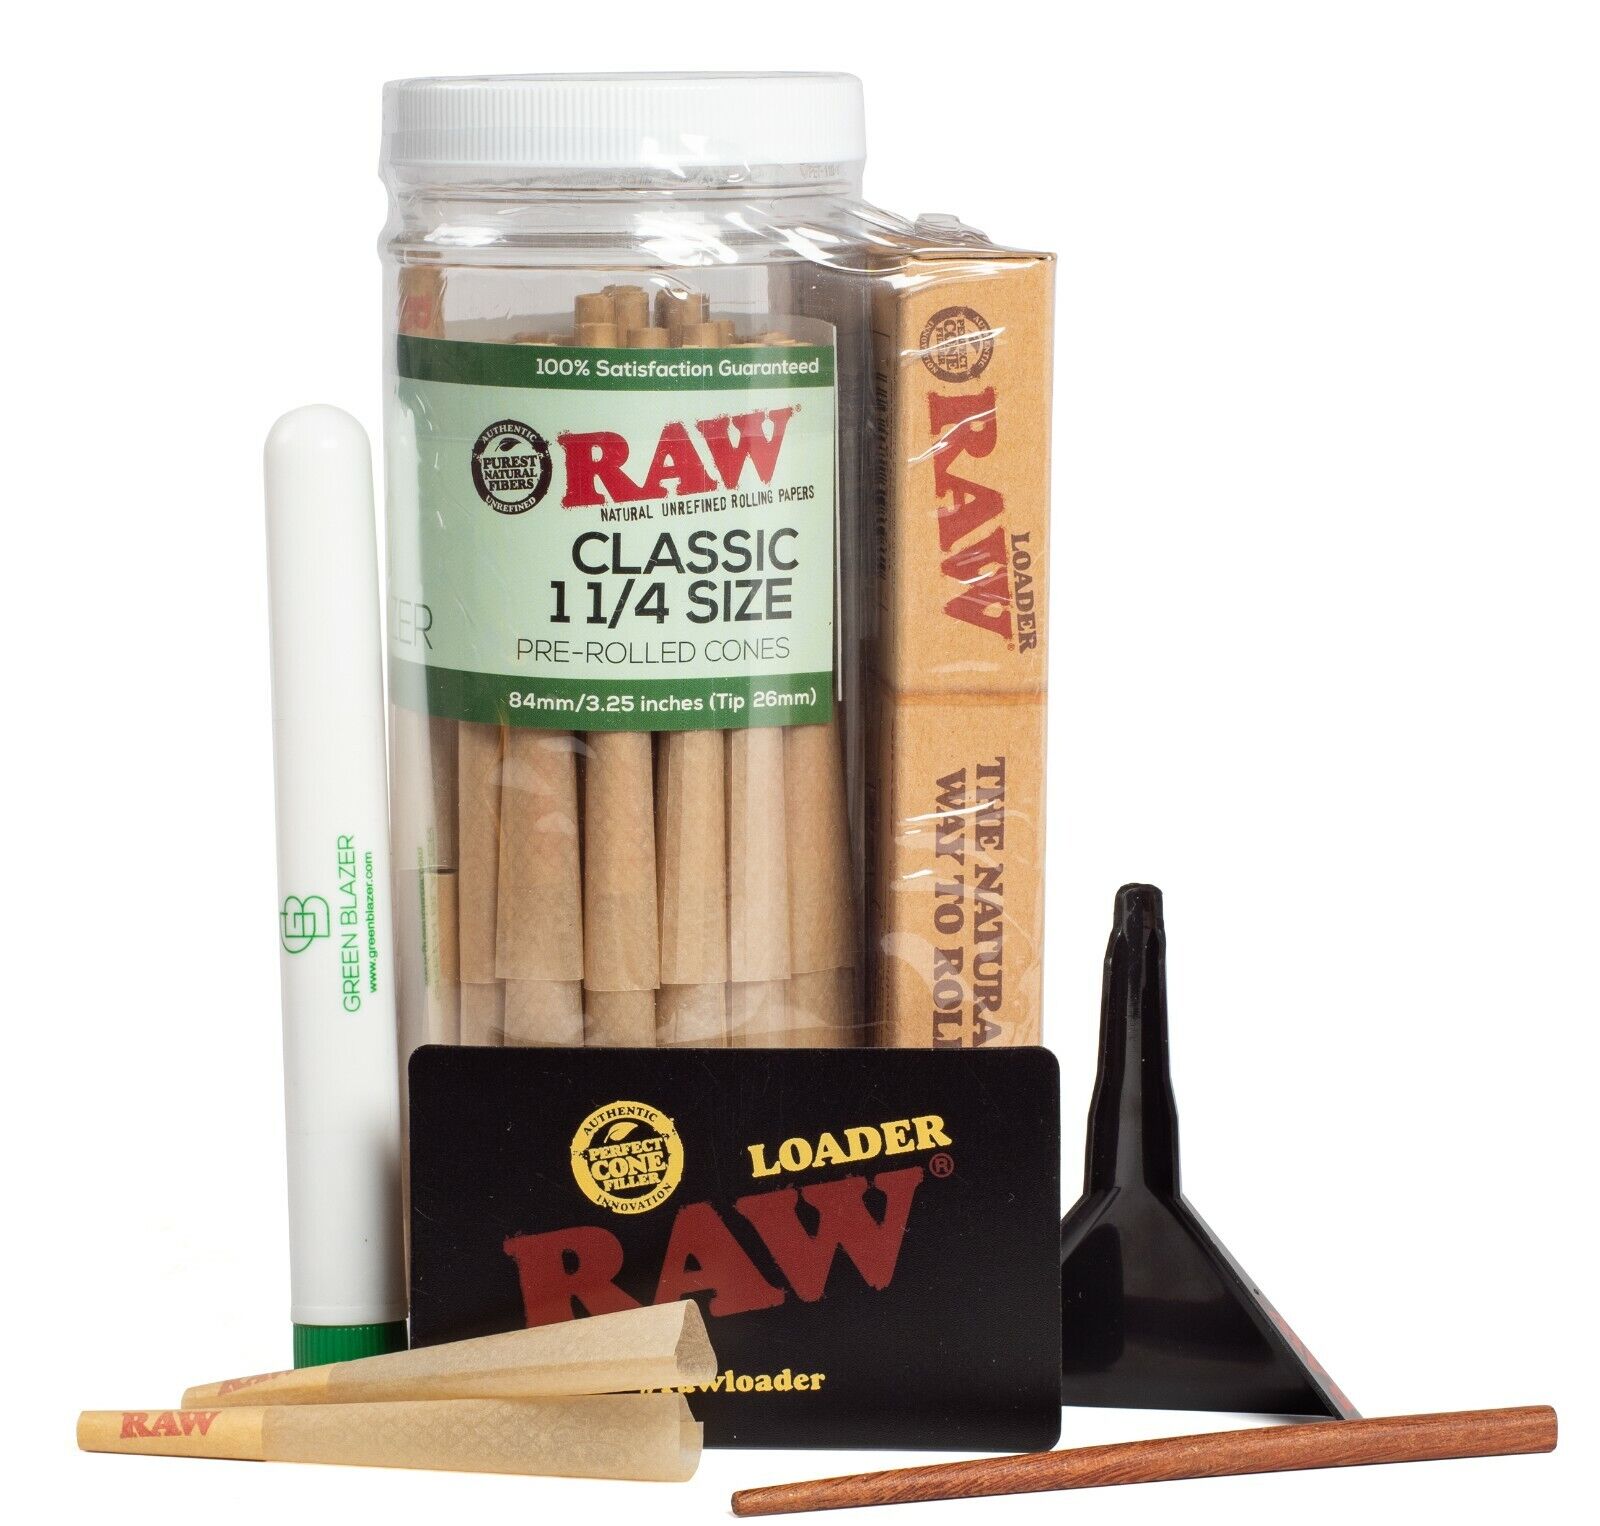 RAW Cones Classic 1 1/4 Size: 100 Pack + Cone Loader Kit